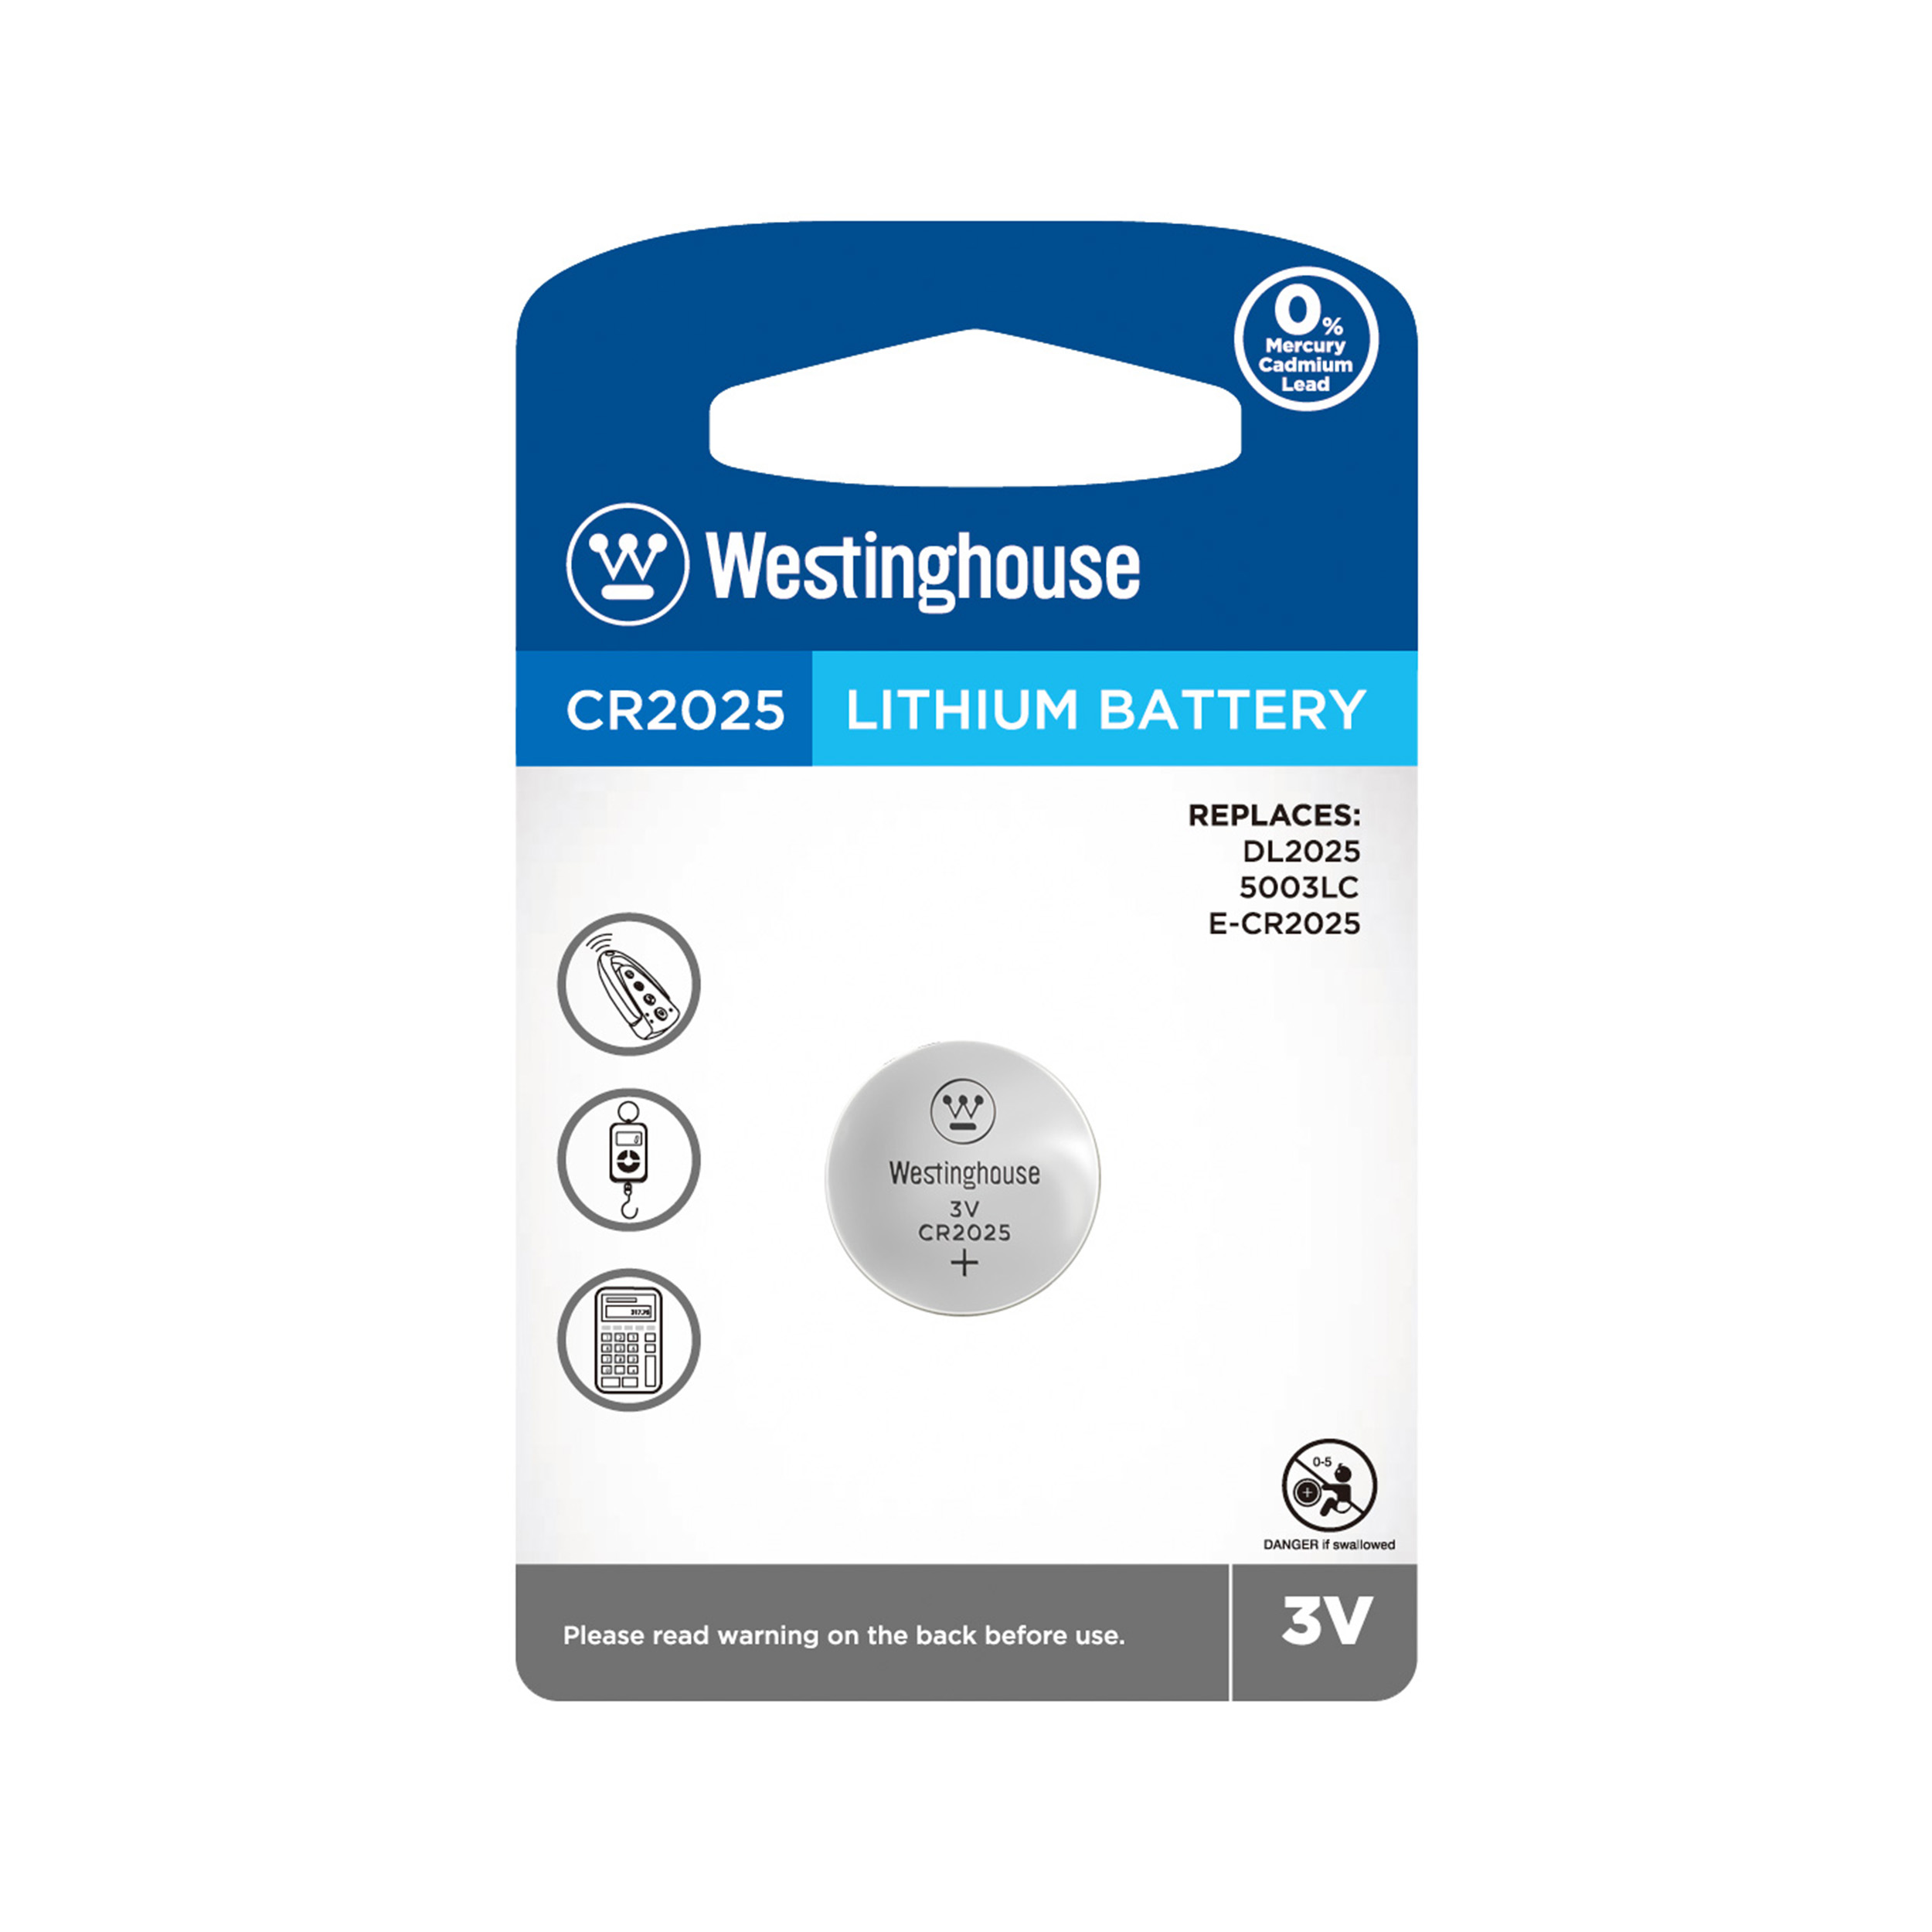 Westinghouse CR2025 3.0V lithium button cell